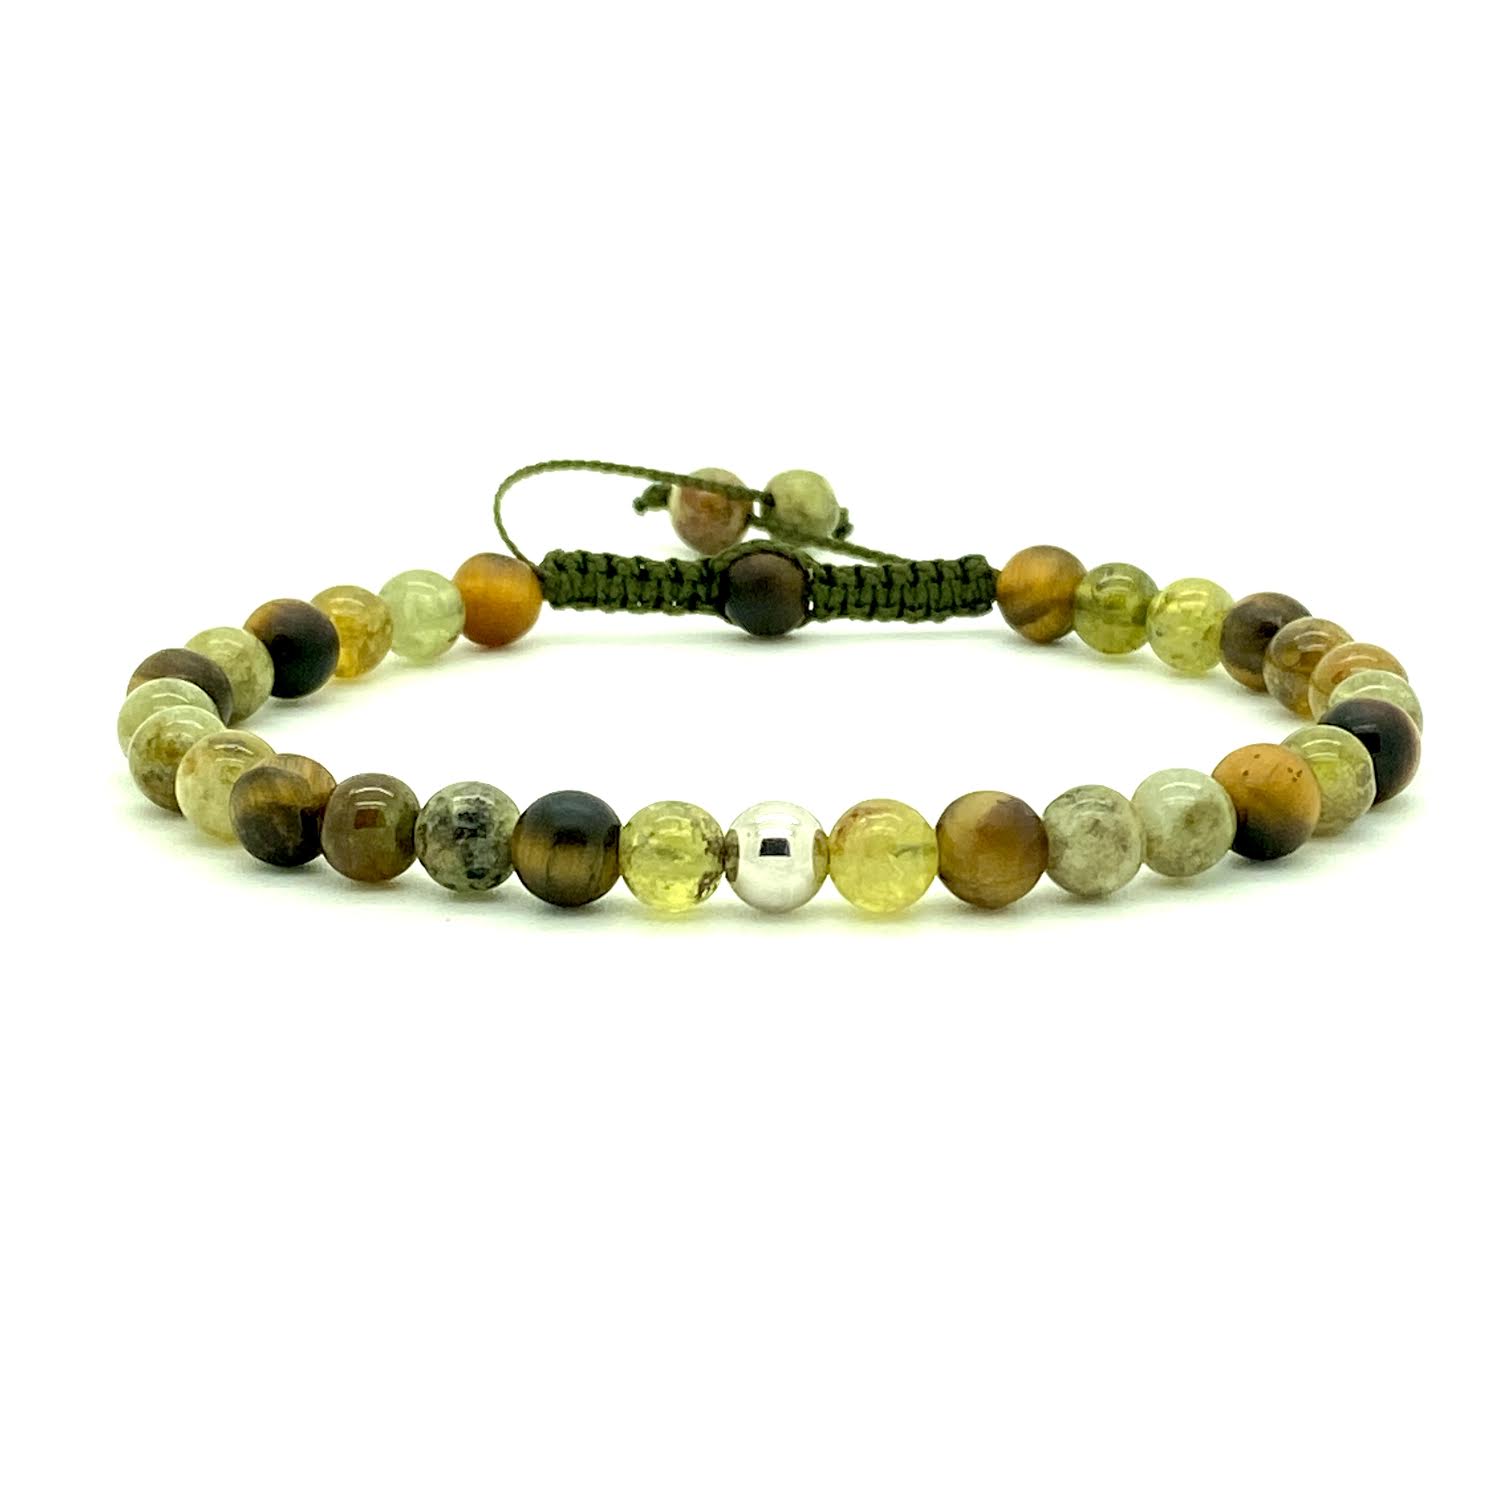 Green Garnet and Tiger's Eye beads have the power of regeneration and growth. This popular beaded bracelet is a perfect staple for your everyday wear. Hand knotted adjustable cord for a perfect fit. Made by WristBend